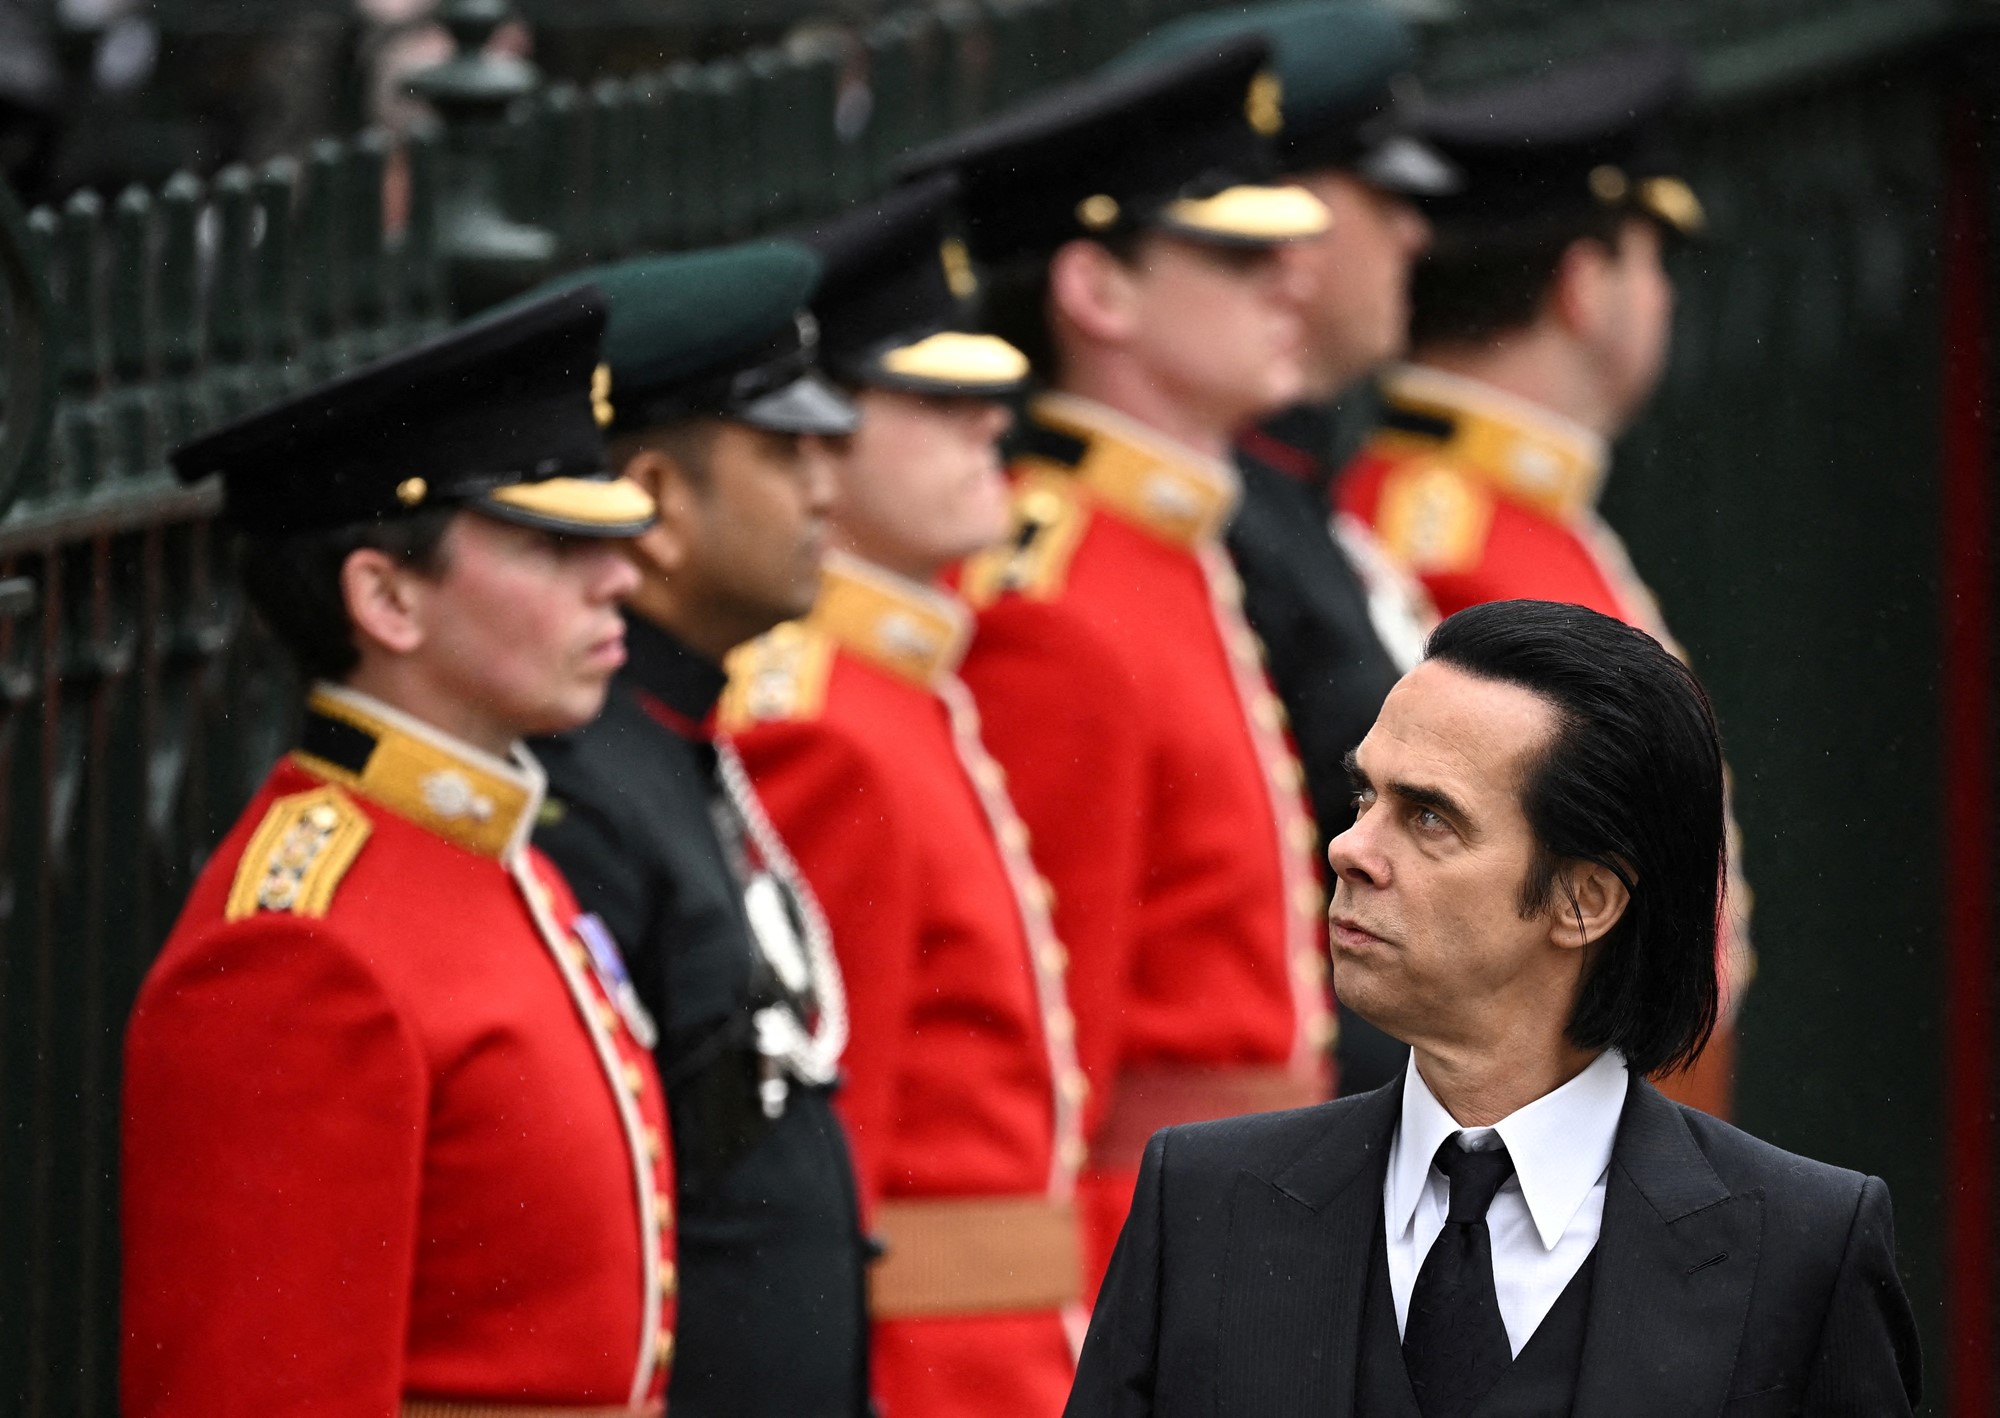 Nick Cave, in the foreground, looks to the side where a row of troops stand behind him,